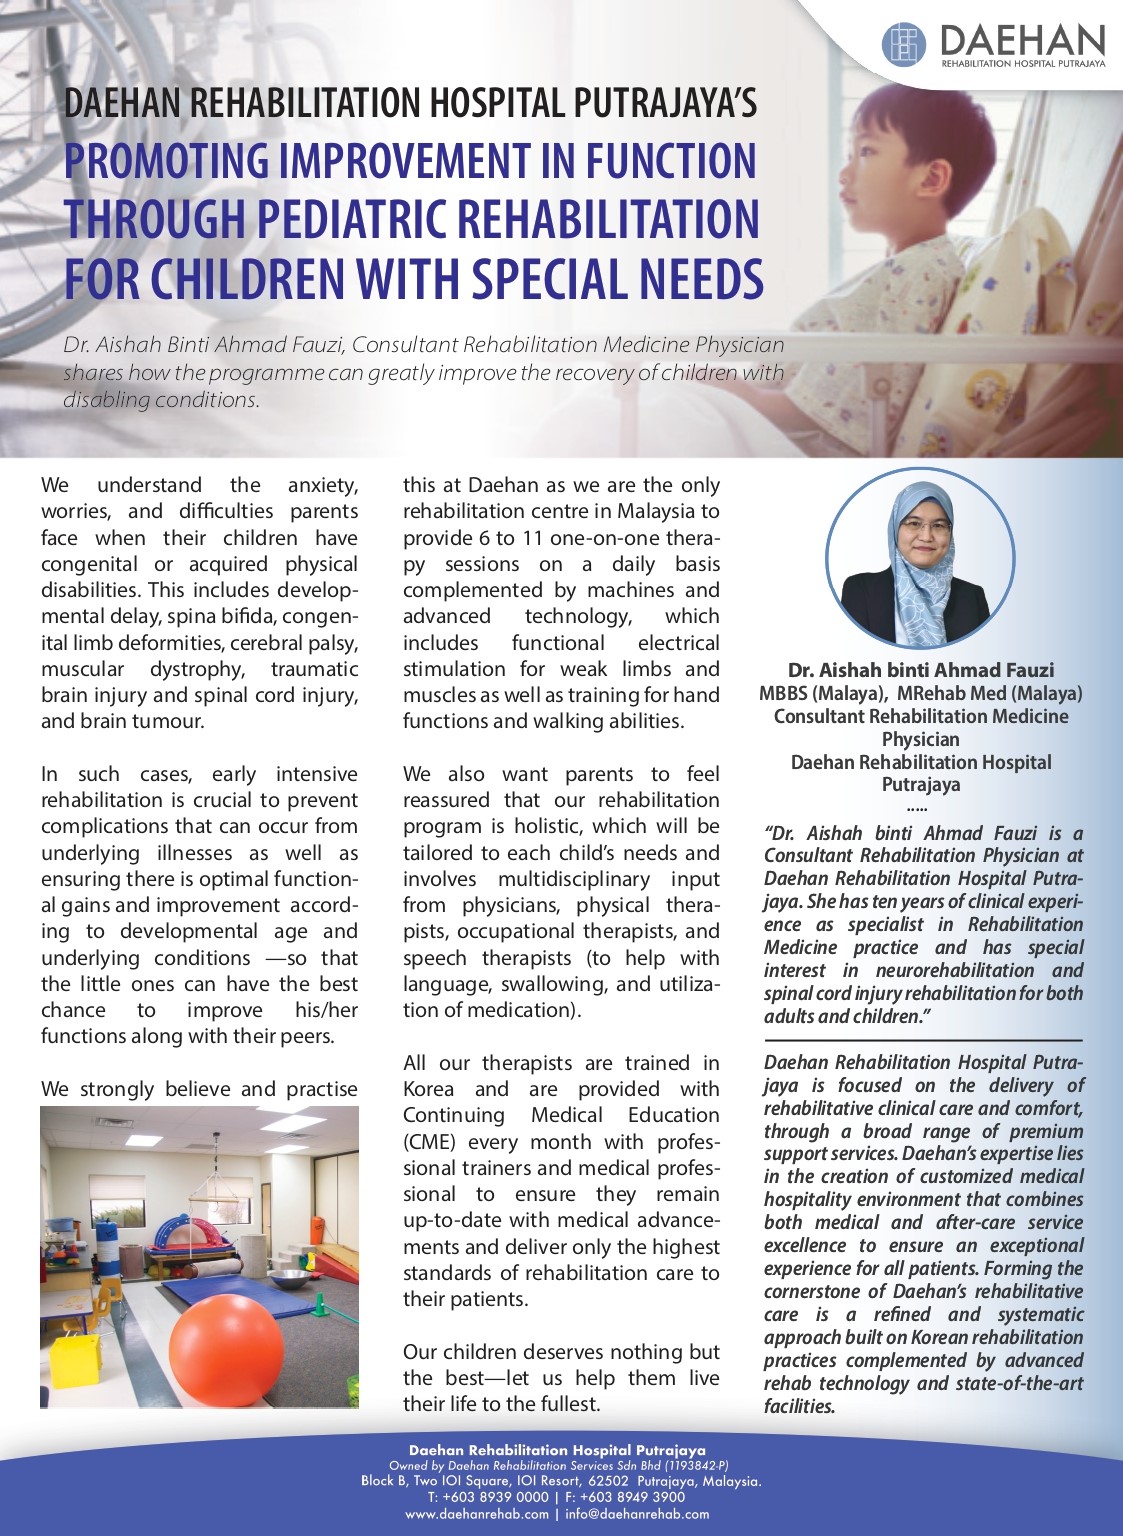 PROMOTING IMPROVEMENT IN FUNCTION THROUGH PEDIATRIC REHABILITATION FOR CHILDREN WITH SPECIAL NEEDS